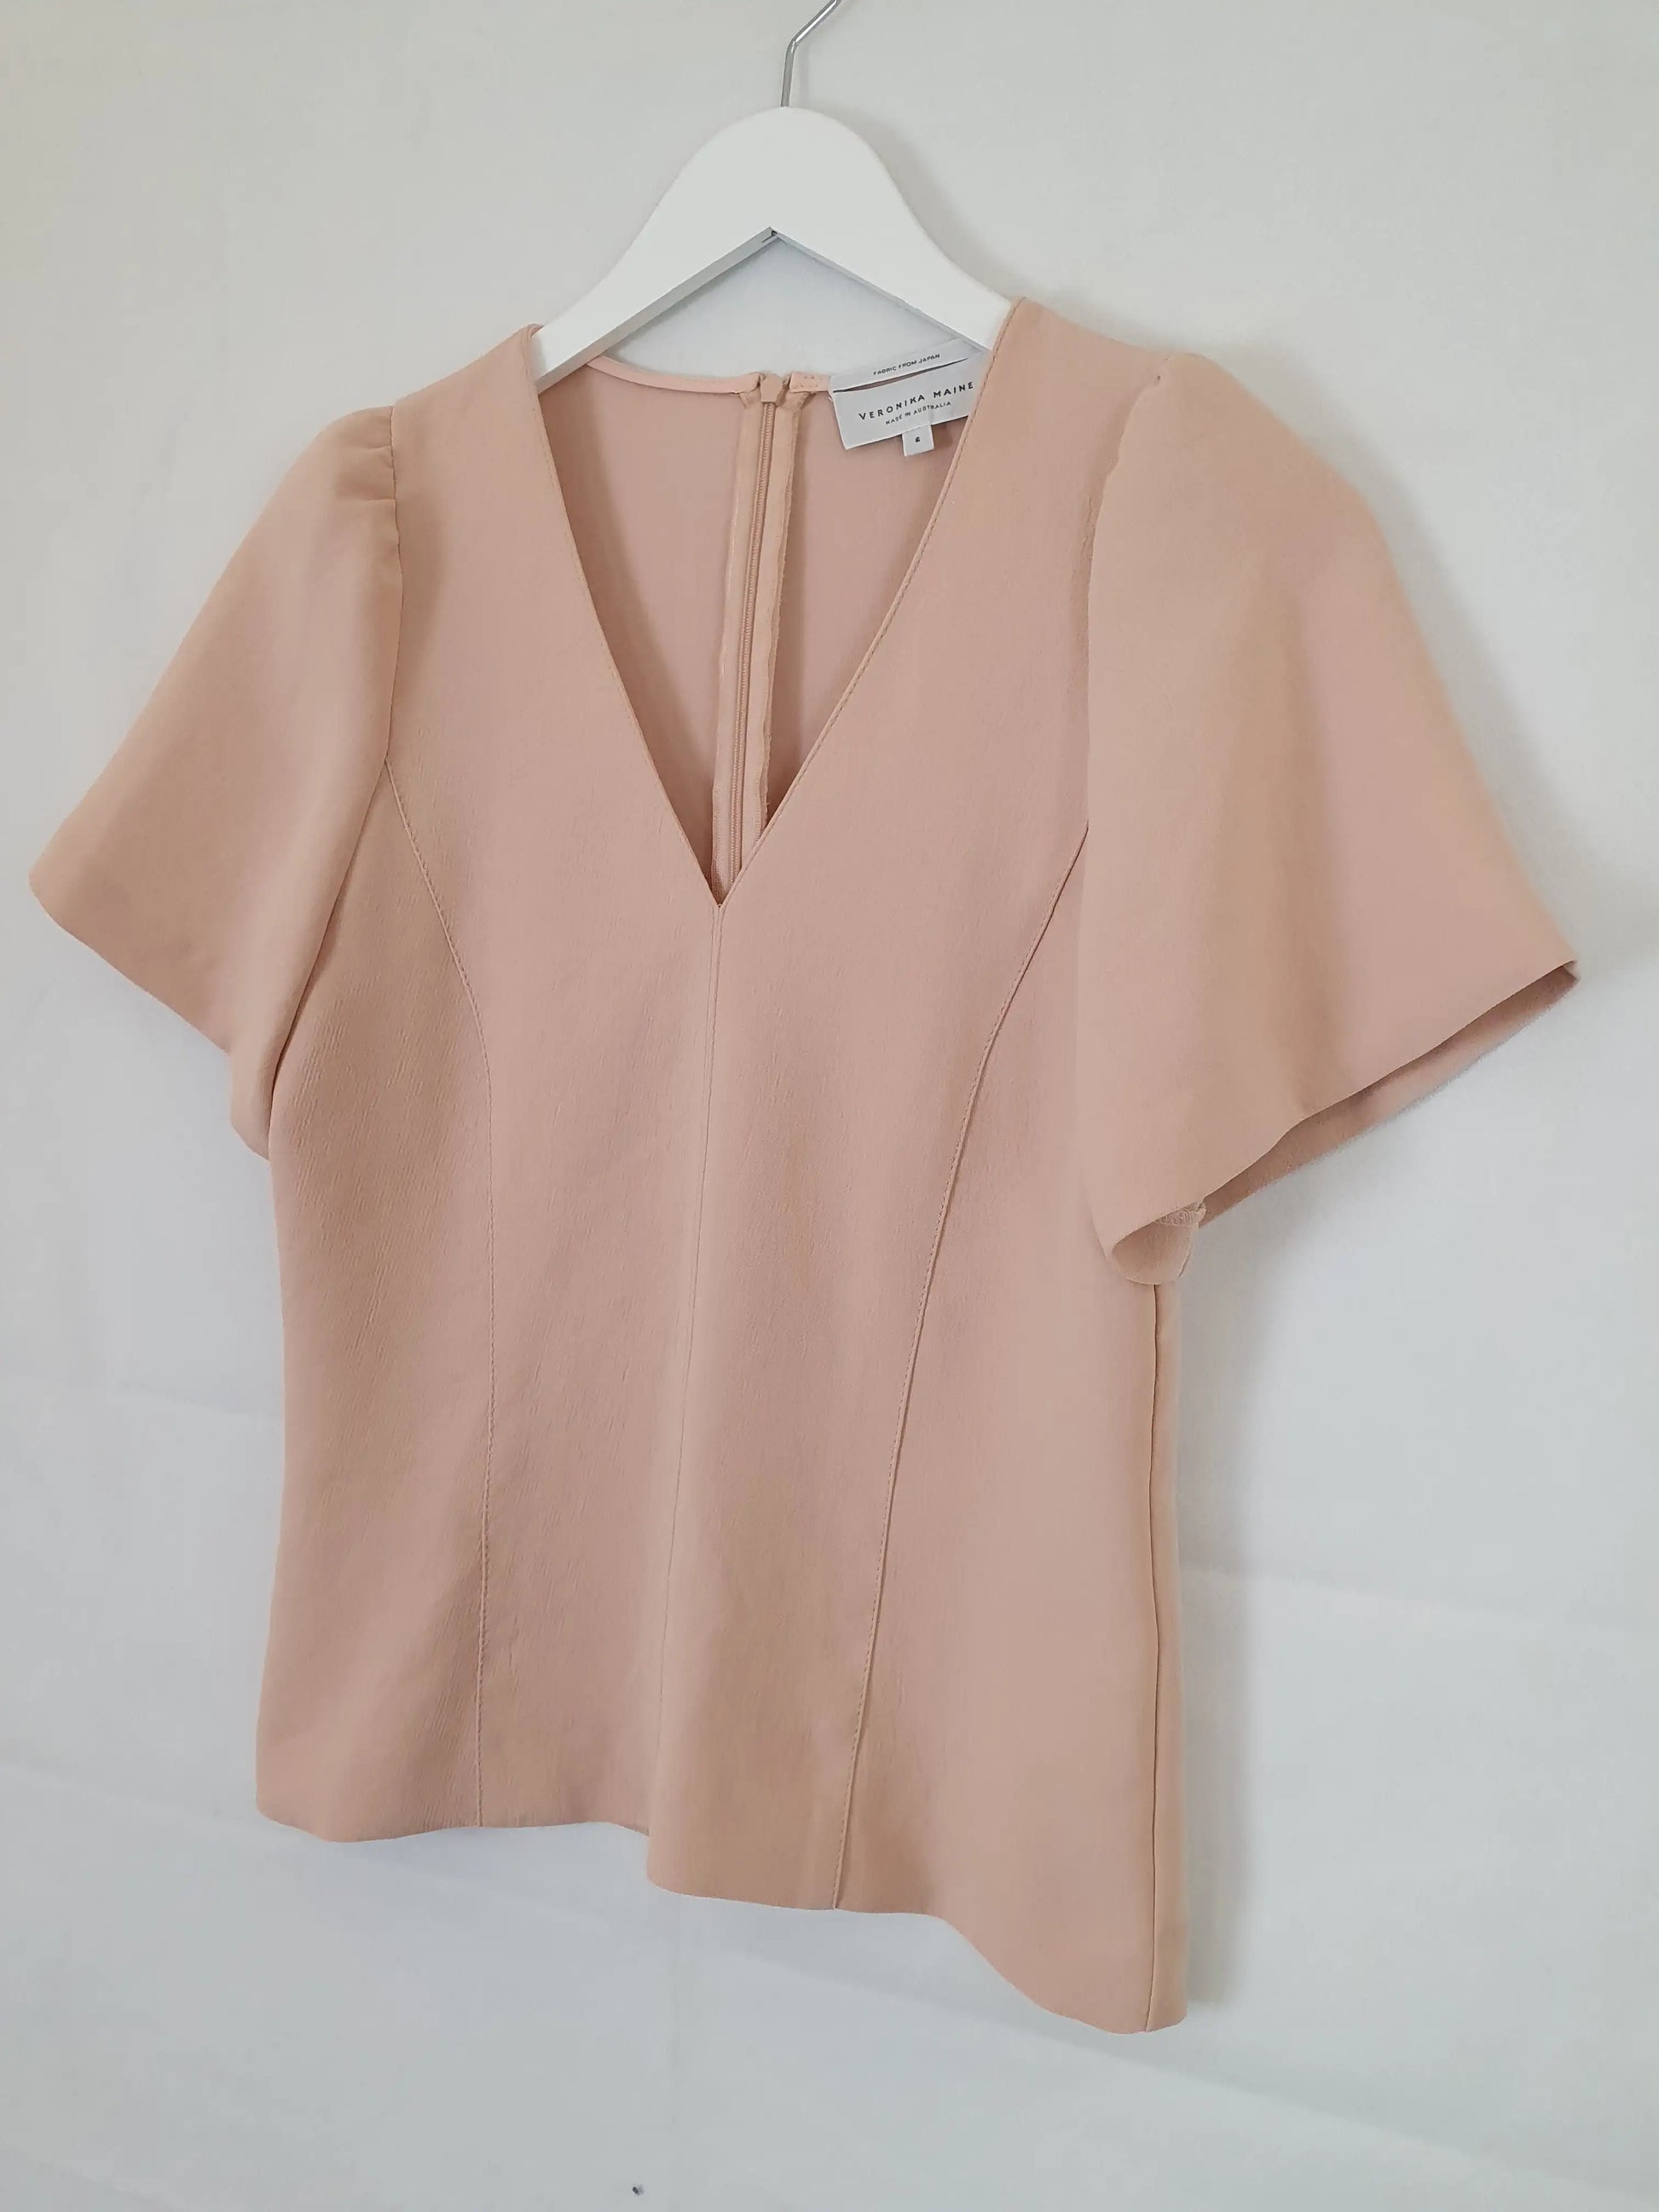 Veronika Maine Office Style Top Size 6 by SwapUp-Second Hand Shop-Thrift Store-Op Shop 